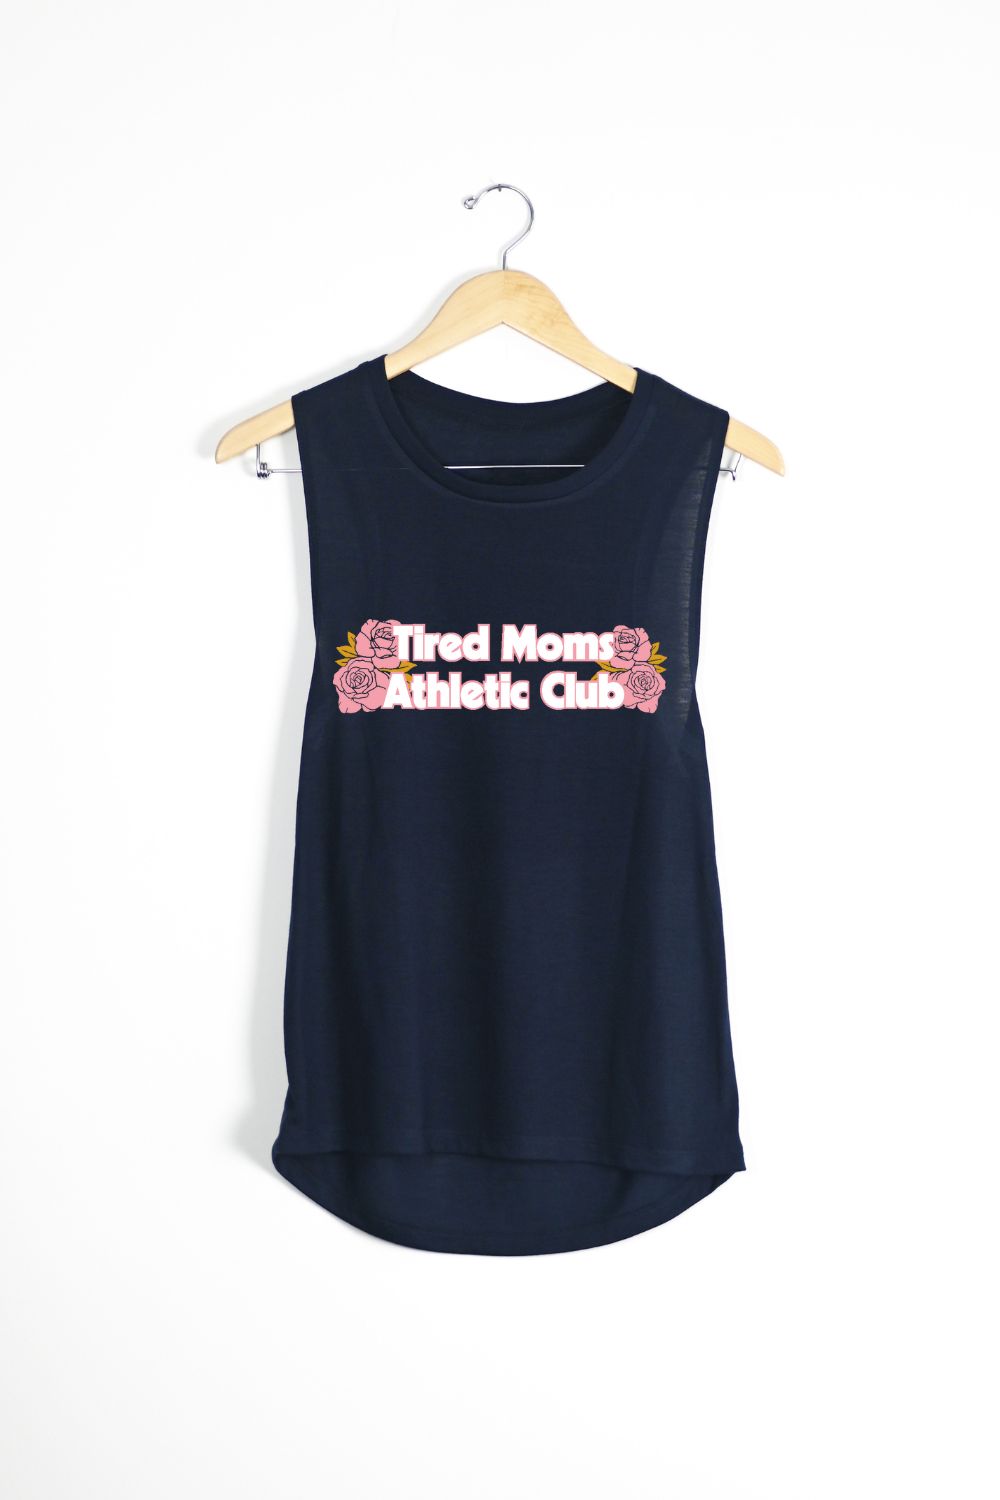 Tired Moms Athletic Club Flower Tank